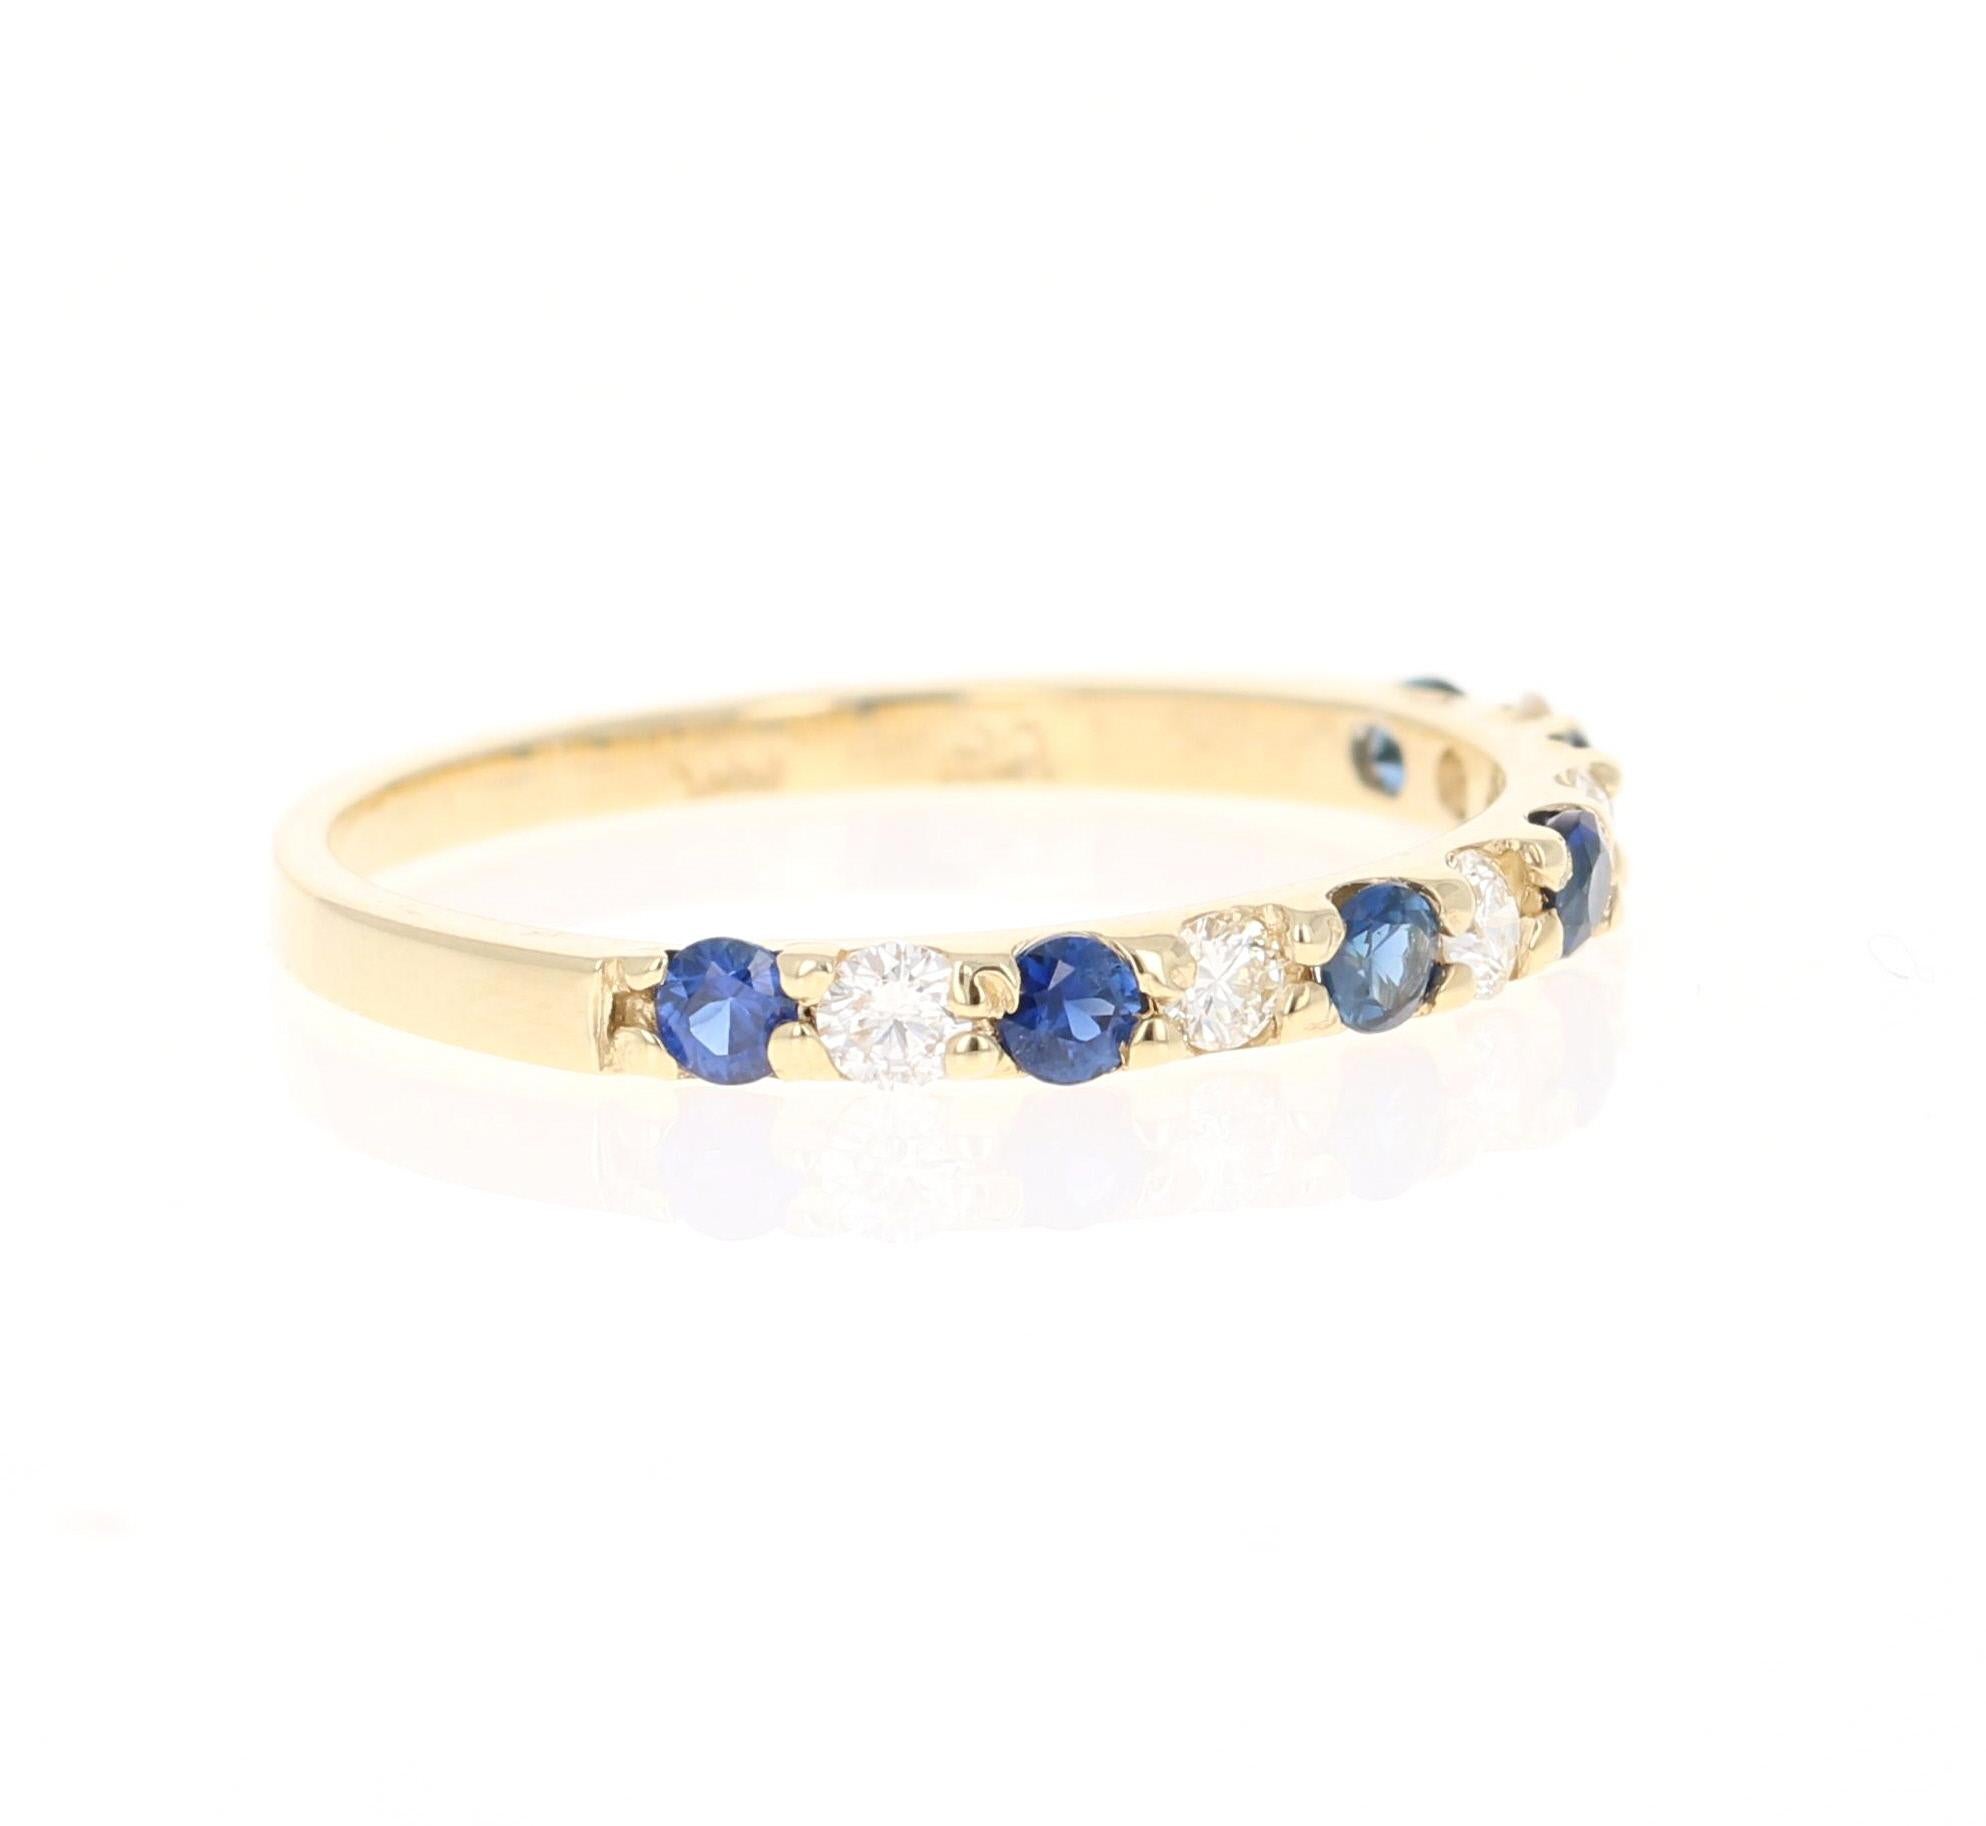 This ring has 6 Blue Sapphires that weigh 0.37 Carats and 5 Round Cut Diamonds that weigh 0.23 Carats. The clarity and color of the diamonds are VS-H. The total carat weight of the ring is 0.60 Carats. 

Crafted in 14 Karat Yellow Gold and is